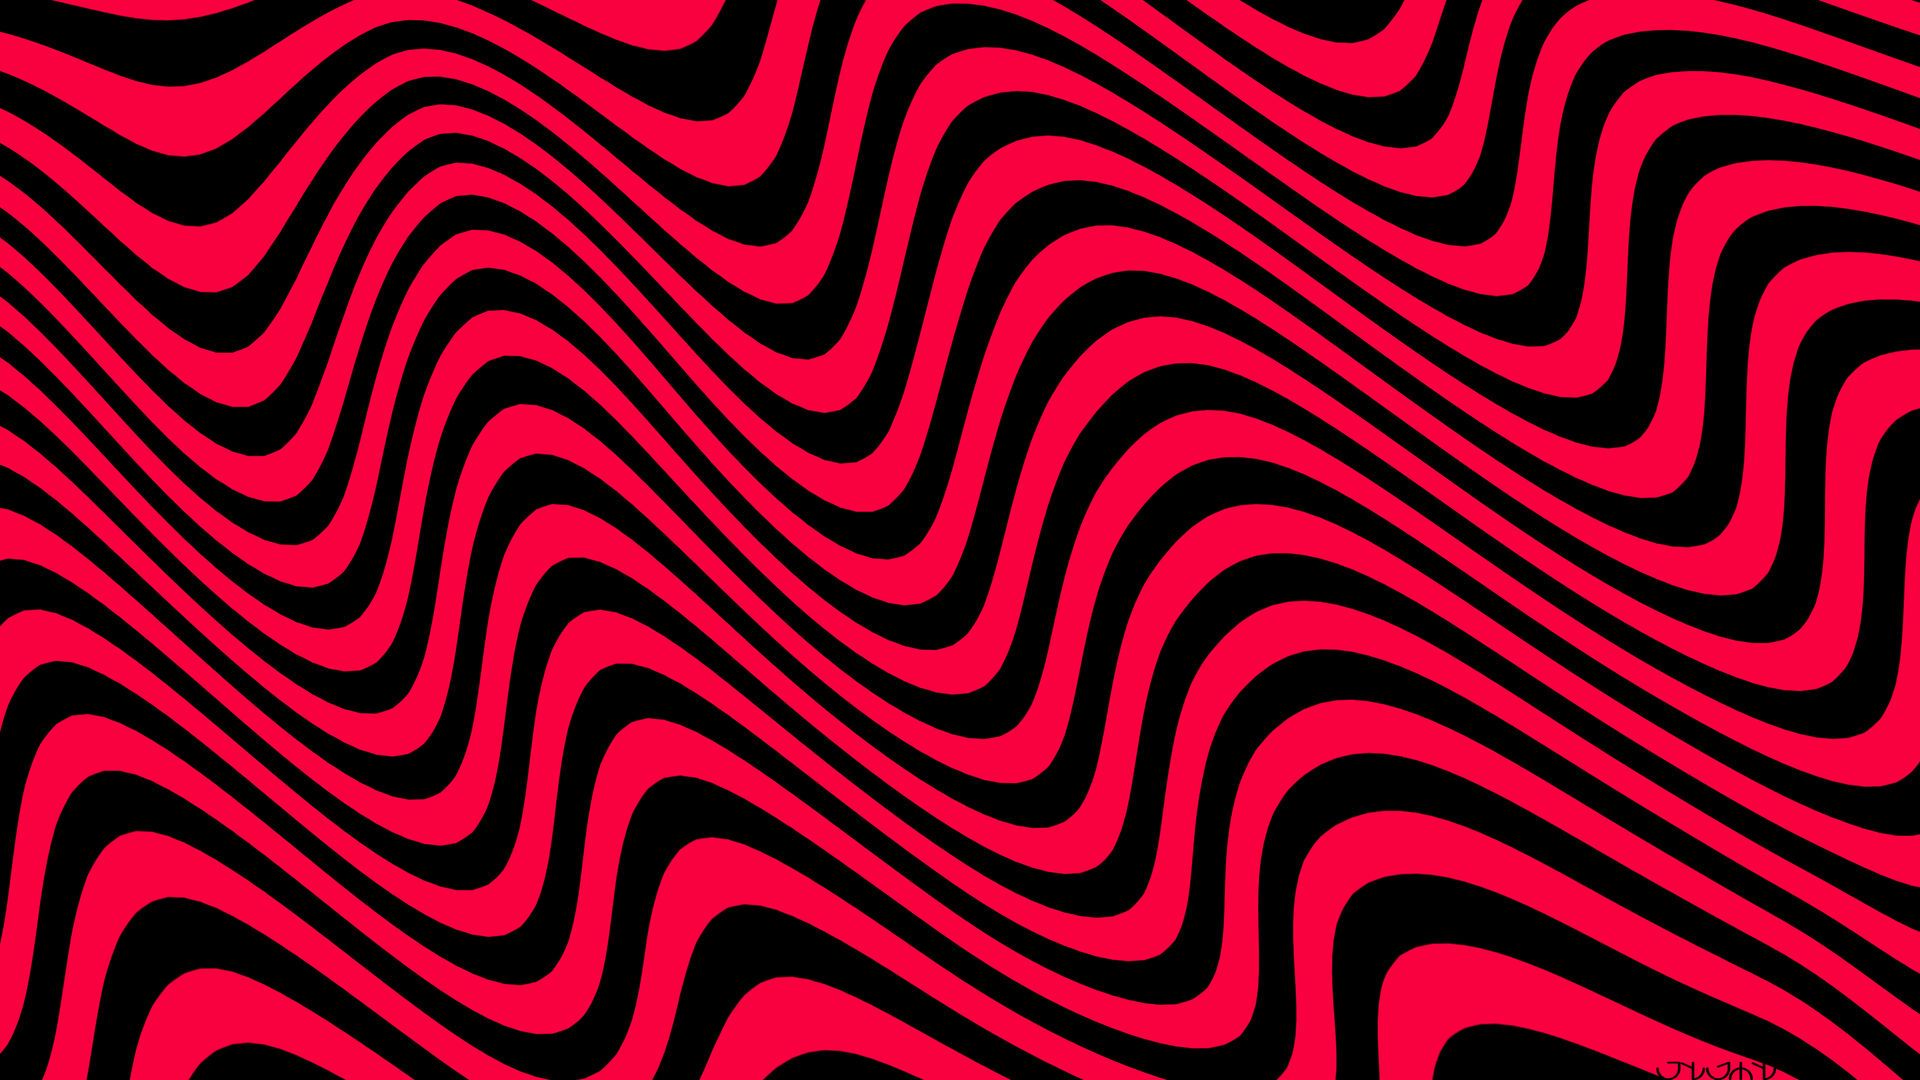 Psychedelic Black and Red [1920x1080][OC]